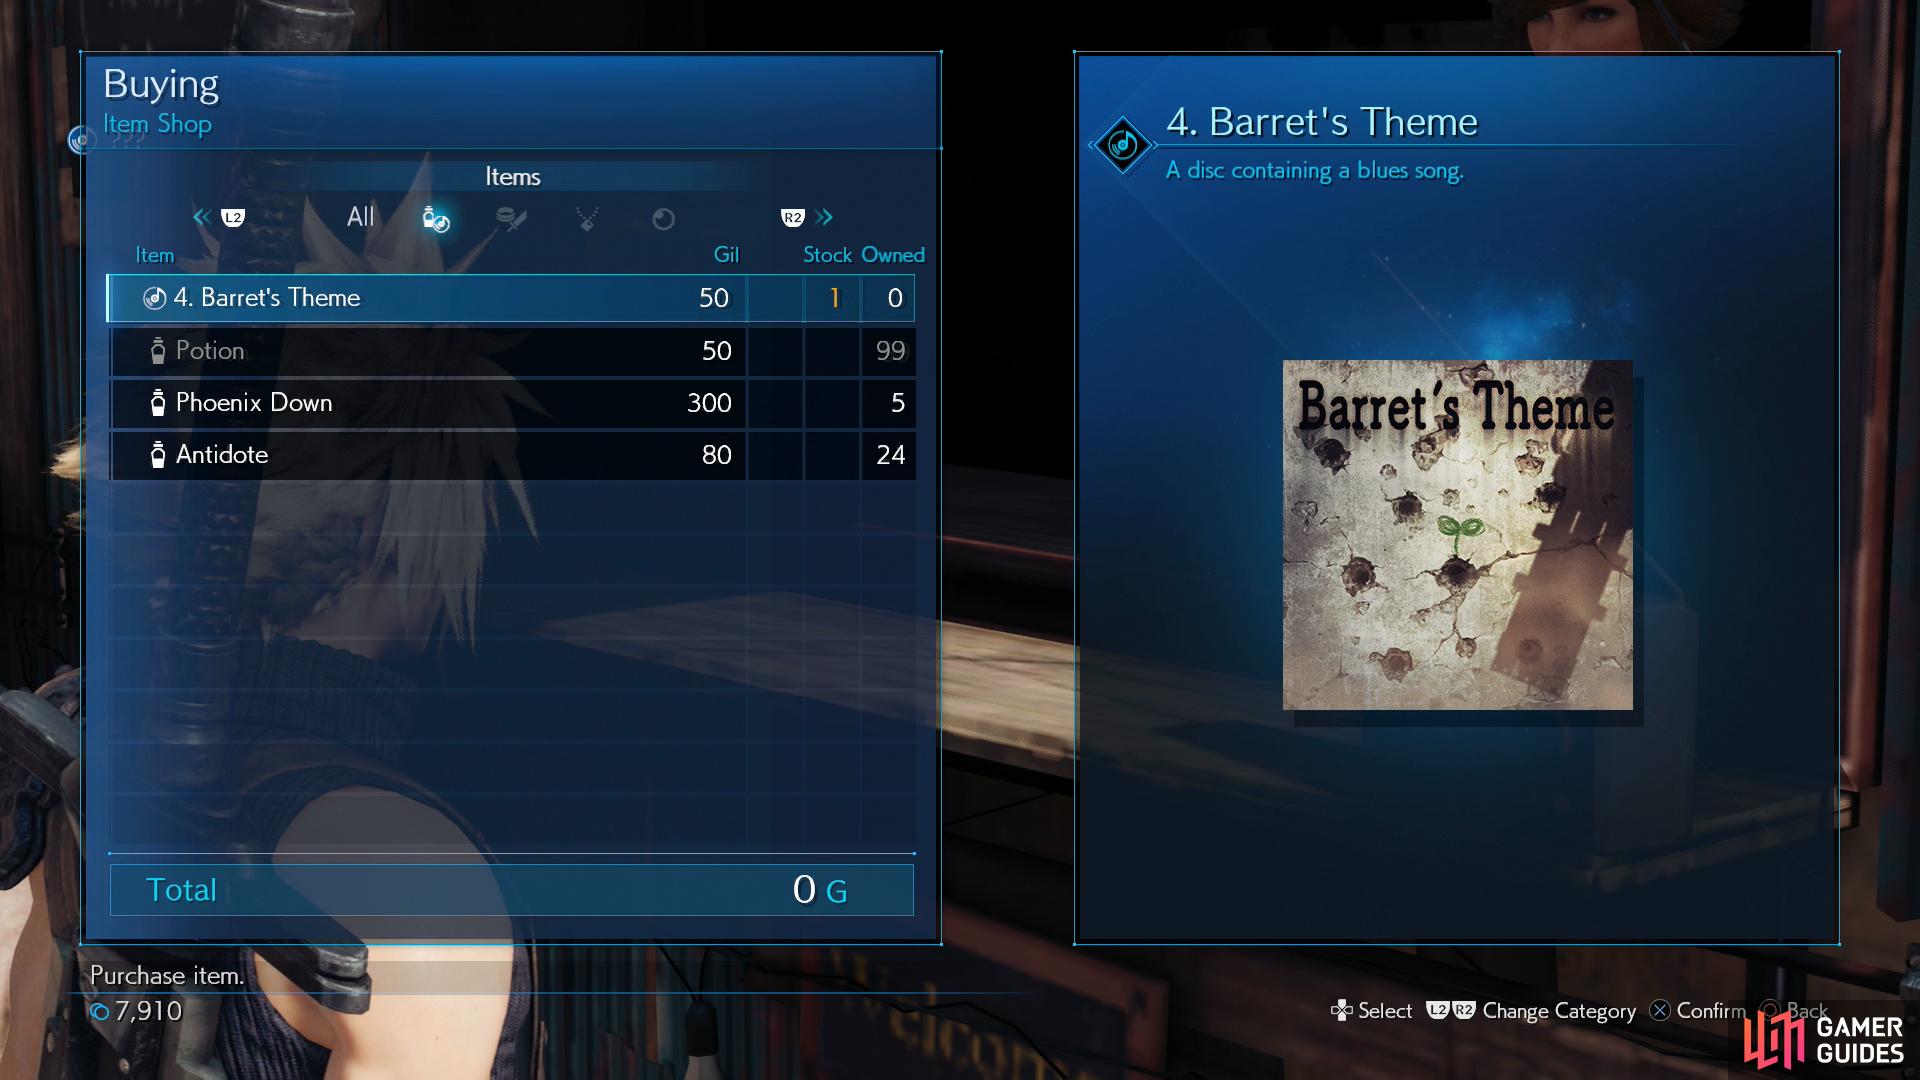 Before heading to Scrap Boulevard, make a detour to the Station Item Shop to buy the "Barret's Theme" Music Disc.